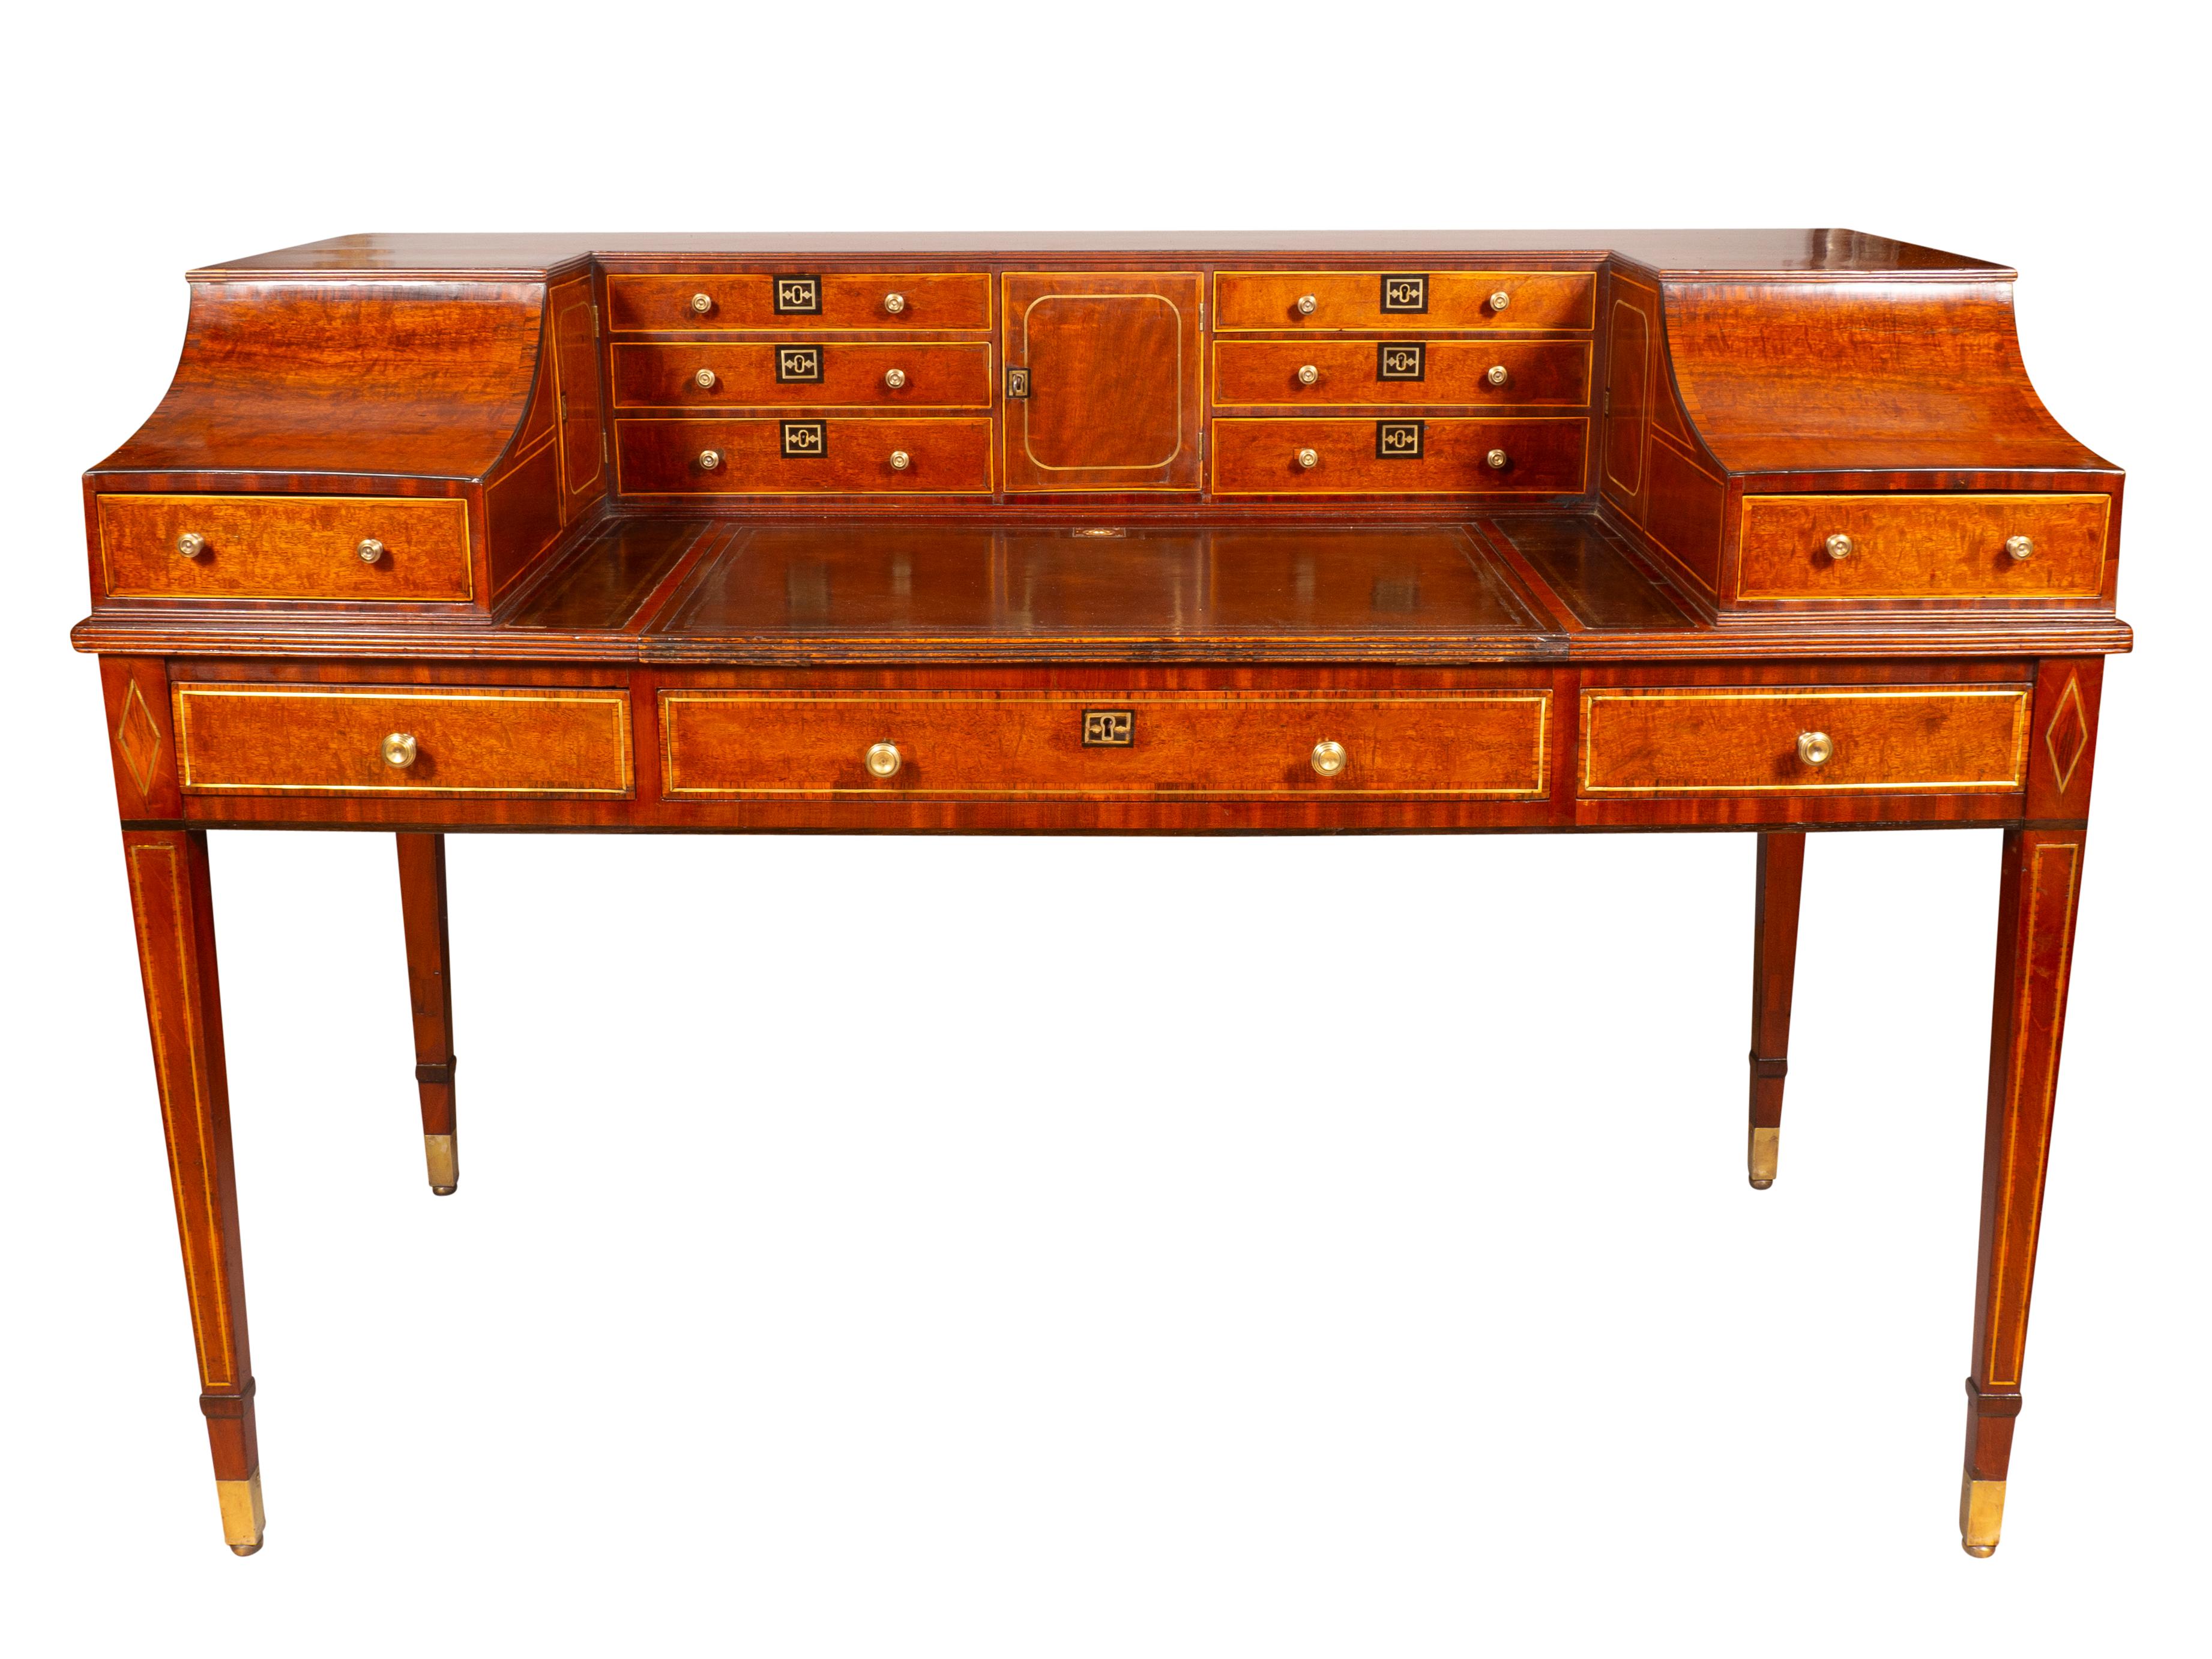 Rectangular top with central leather liner hinged writing surface surrounded by drawers and doors. The back finished Frieze drawers all with brass inlays. Raised on square tapered legs with brass feet. Ex Hyde Park Antiques. NYC.